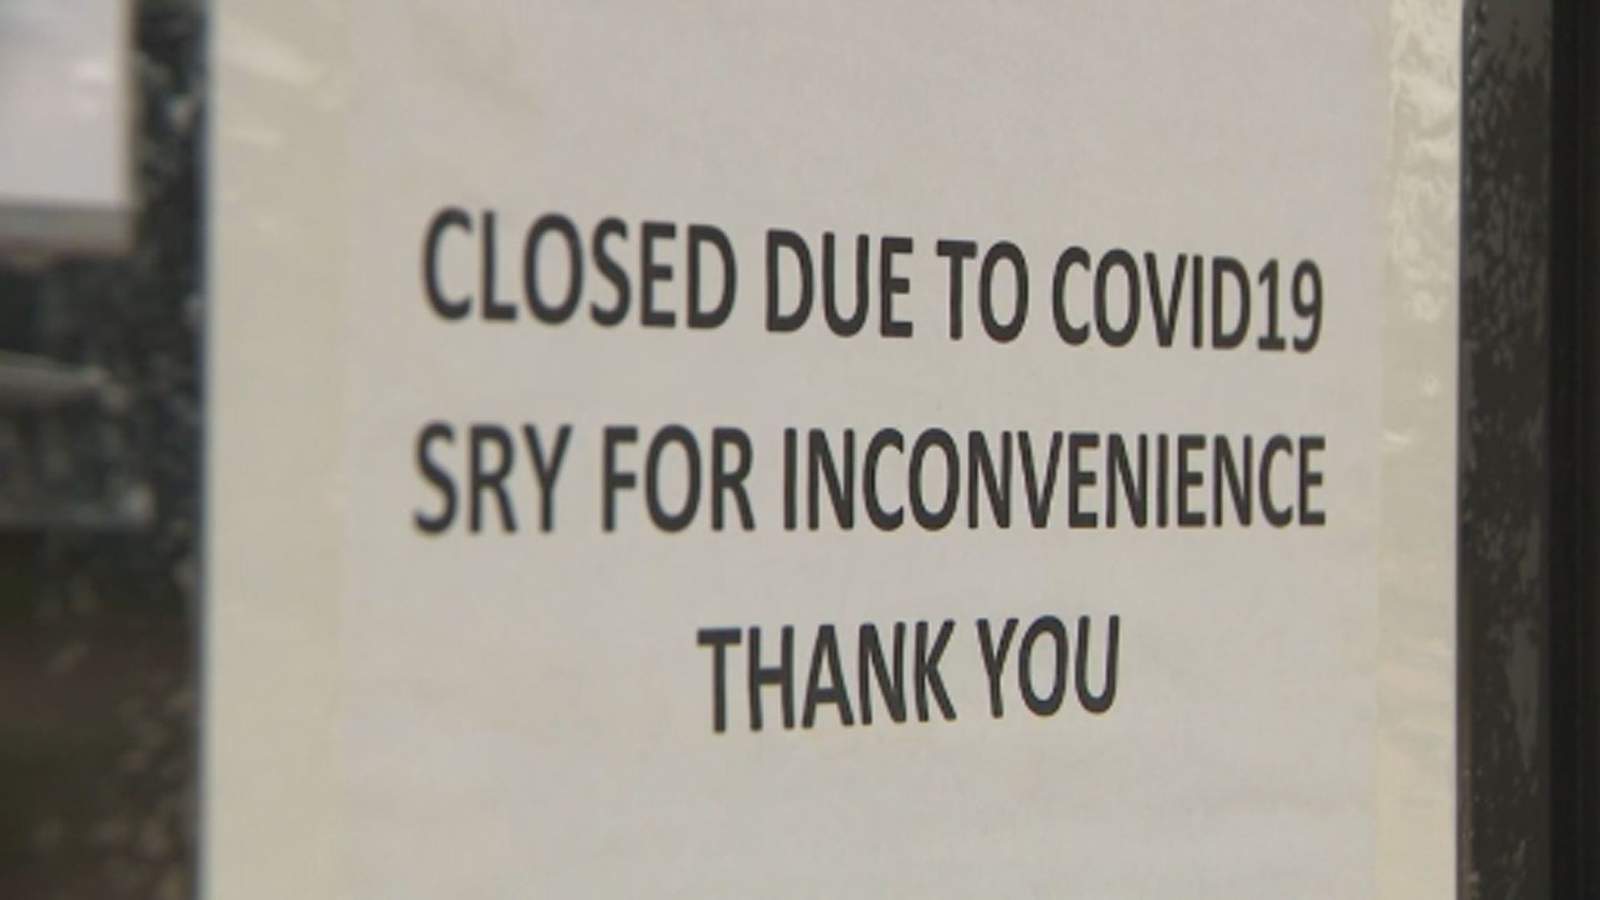 Bar owners forced to closed during the pandemic gets evicted for past due commercial rent